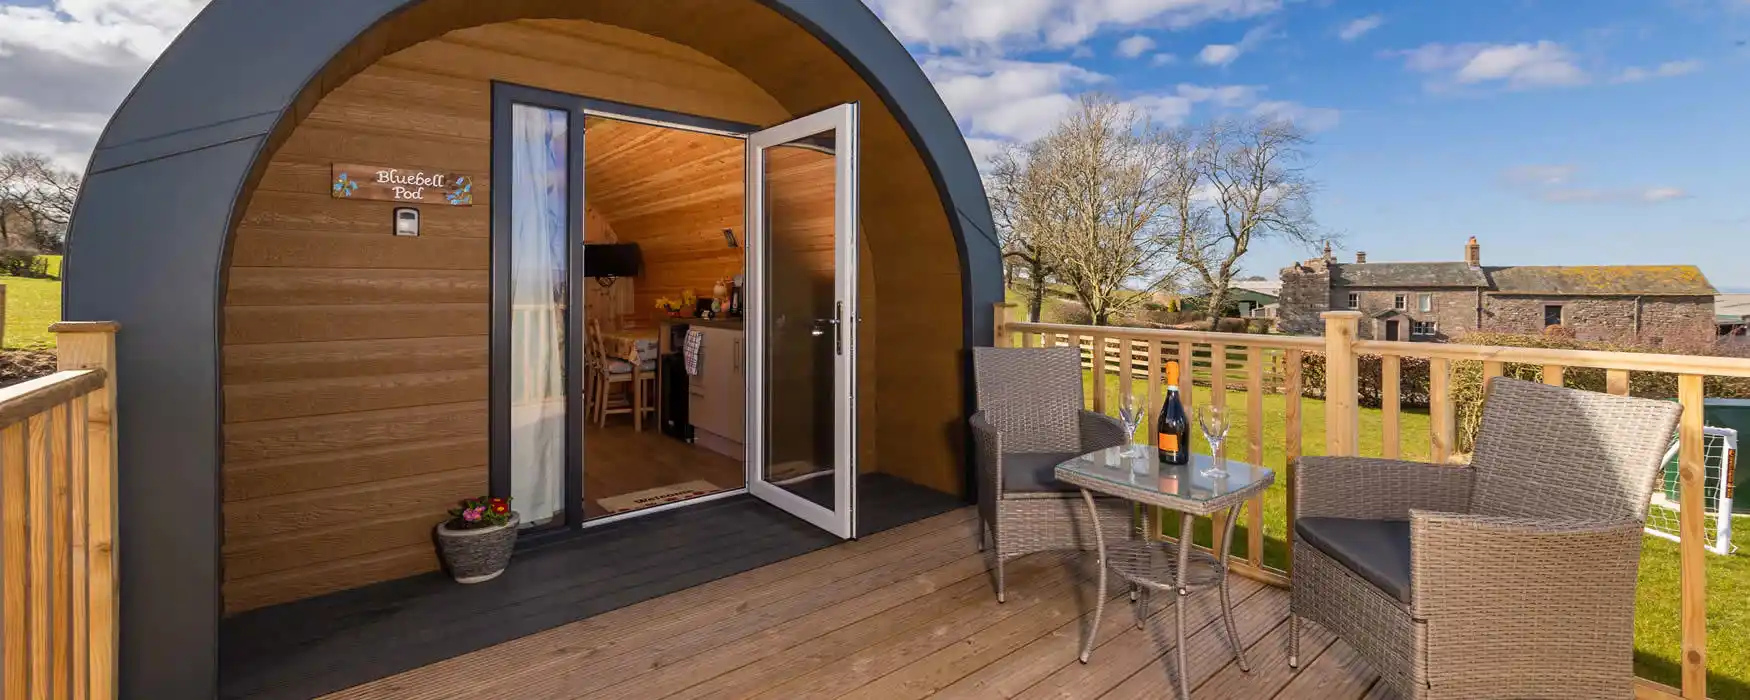 Pooley Bridge camping and glamping pods